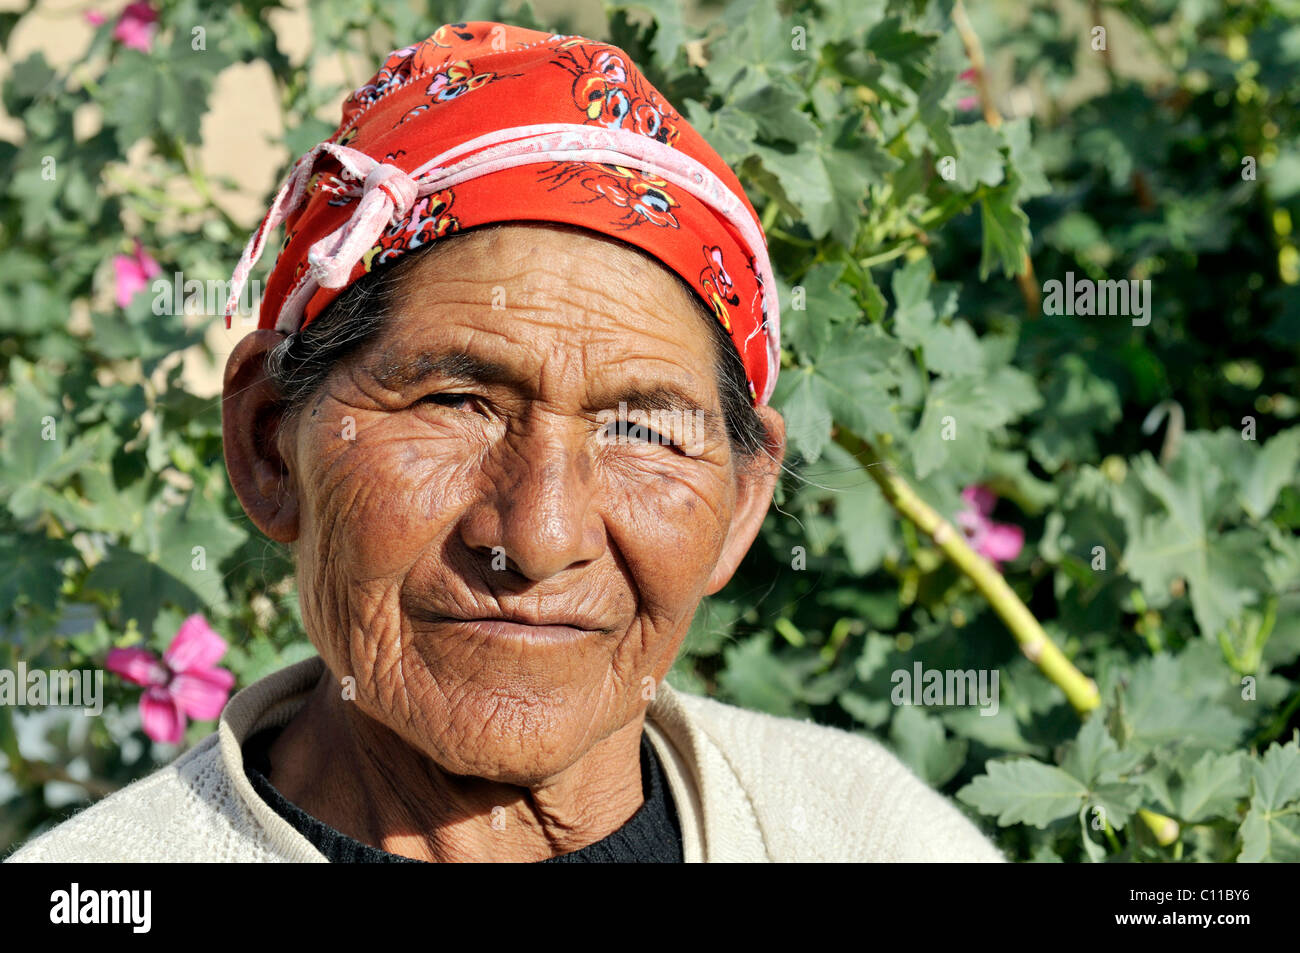 Old woman with a red headscarf, Bolivian Altiplano highlands, Departamento Oruro, Bolivia, South America Stock Photo